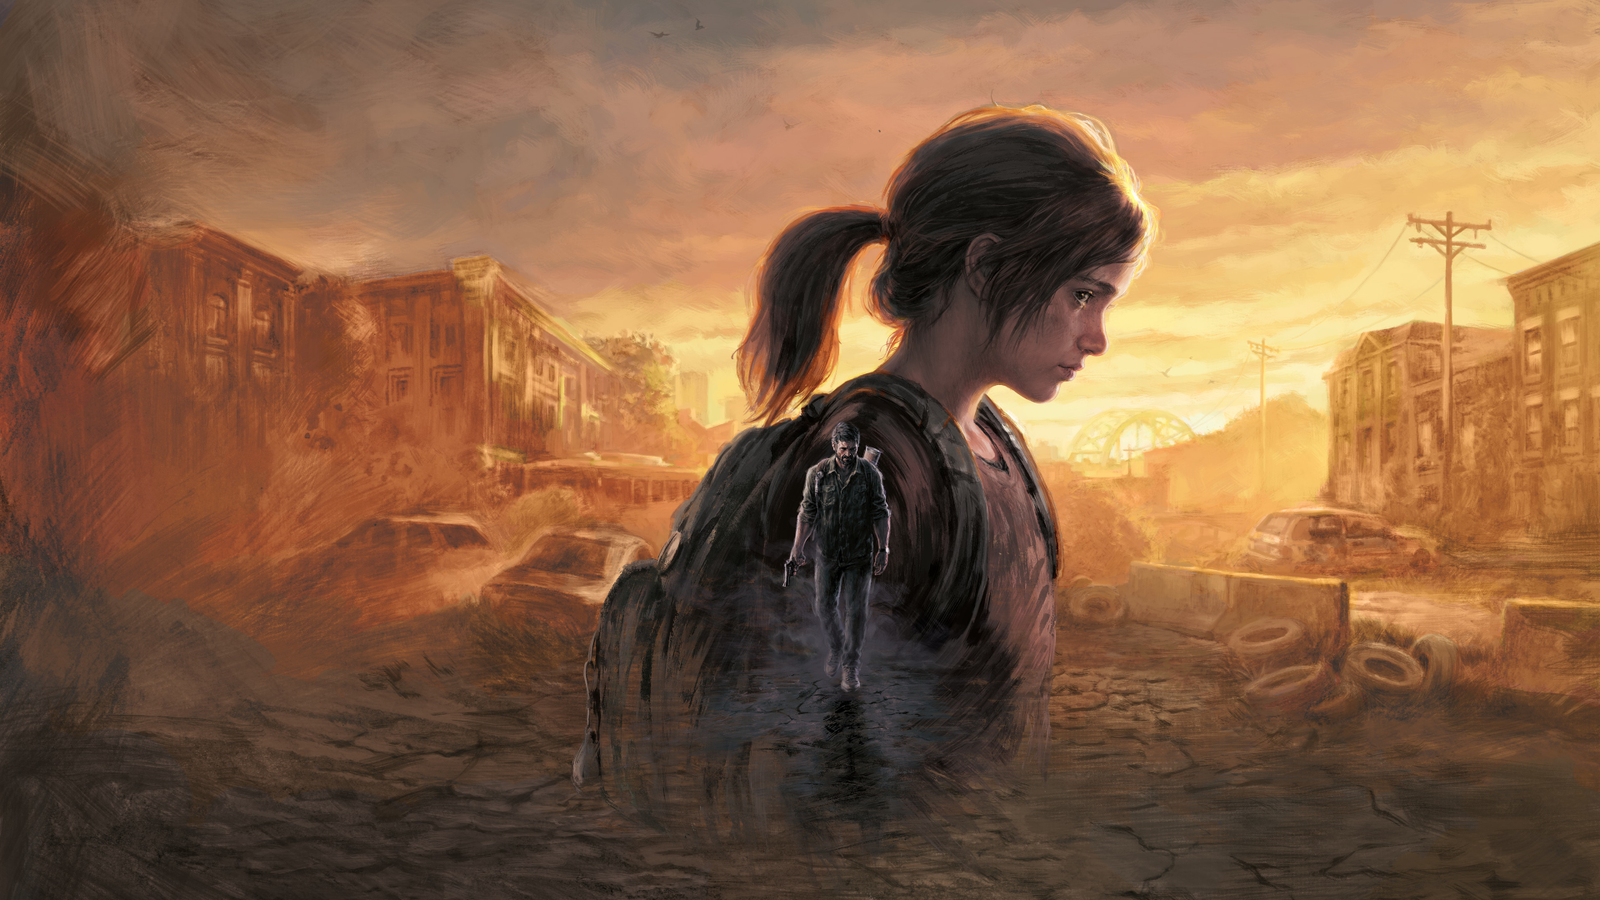 The Last Of Us PC port is finally in development - 9to5Toys